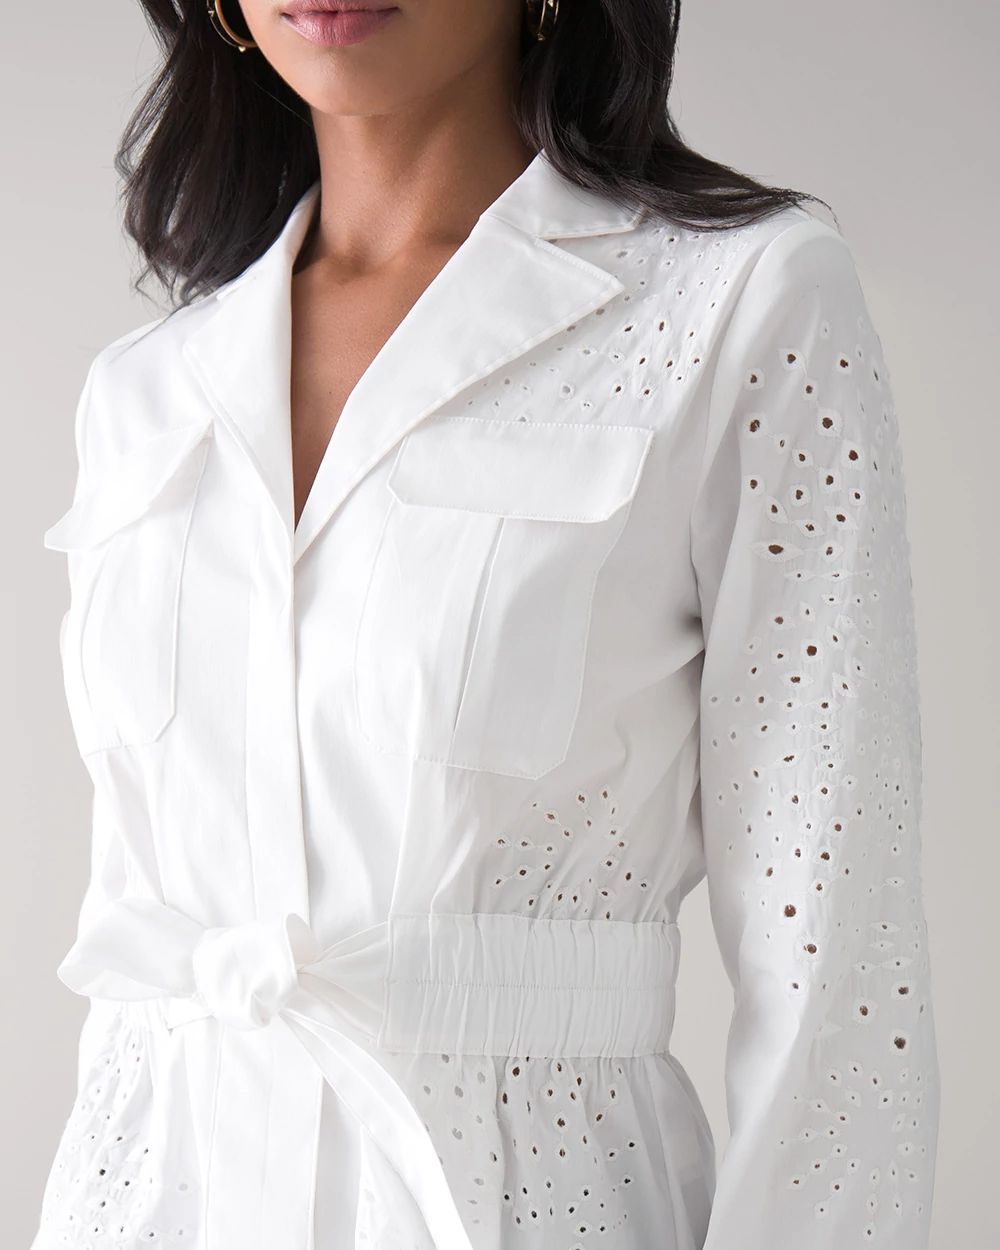 Tie-Waist Embroidered Poplin Shirt click to view larger image.